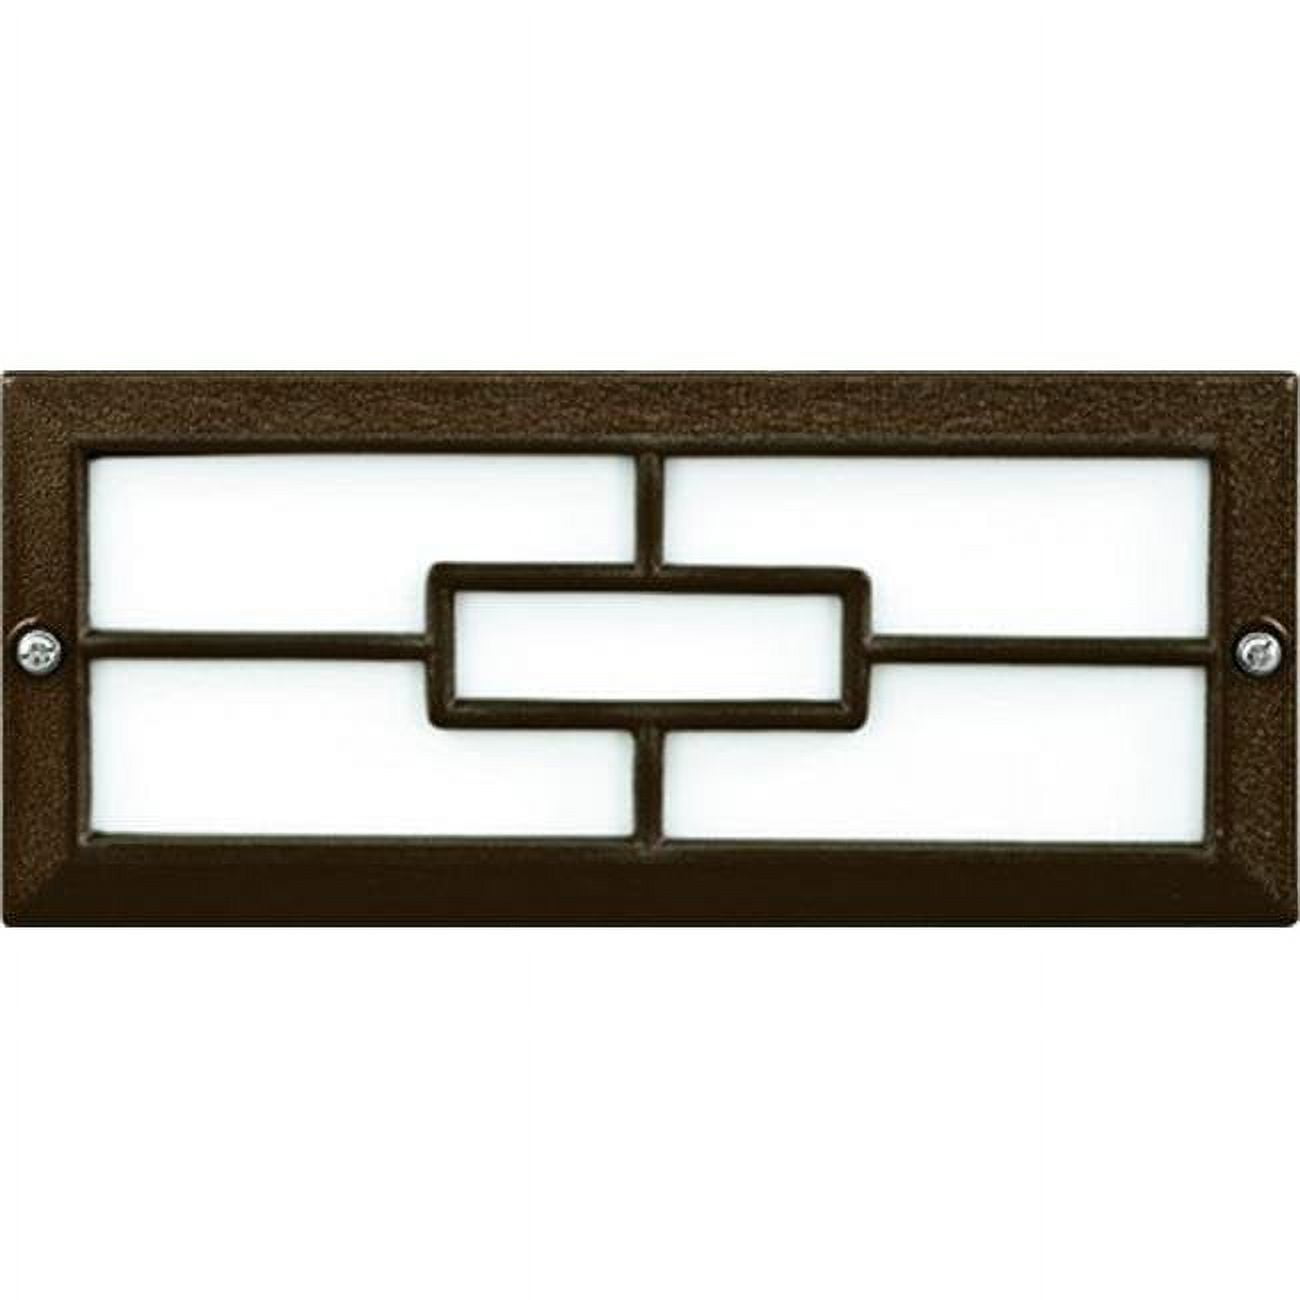 Picture of Dabmar Lighting LV636-BZ Cast Aluminum Recessed Brick, Step & Wall Light, Bronze - 4 x 9.13 x 3.25 in.